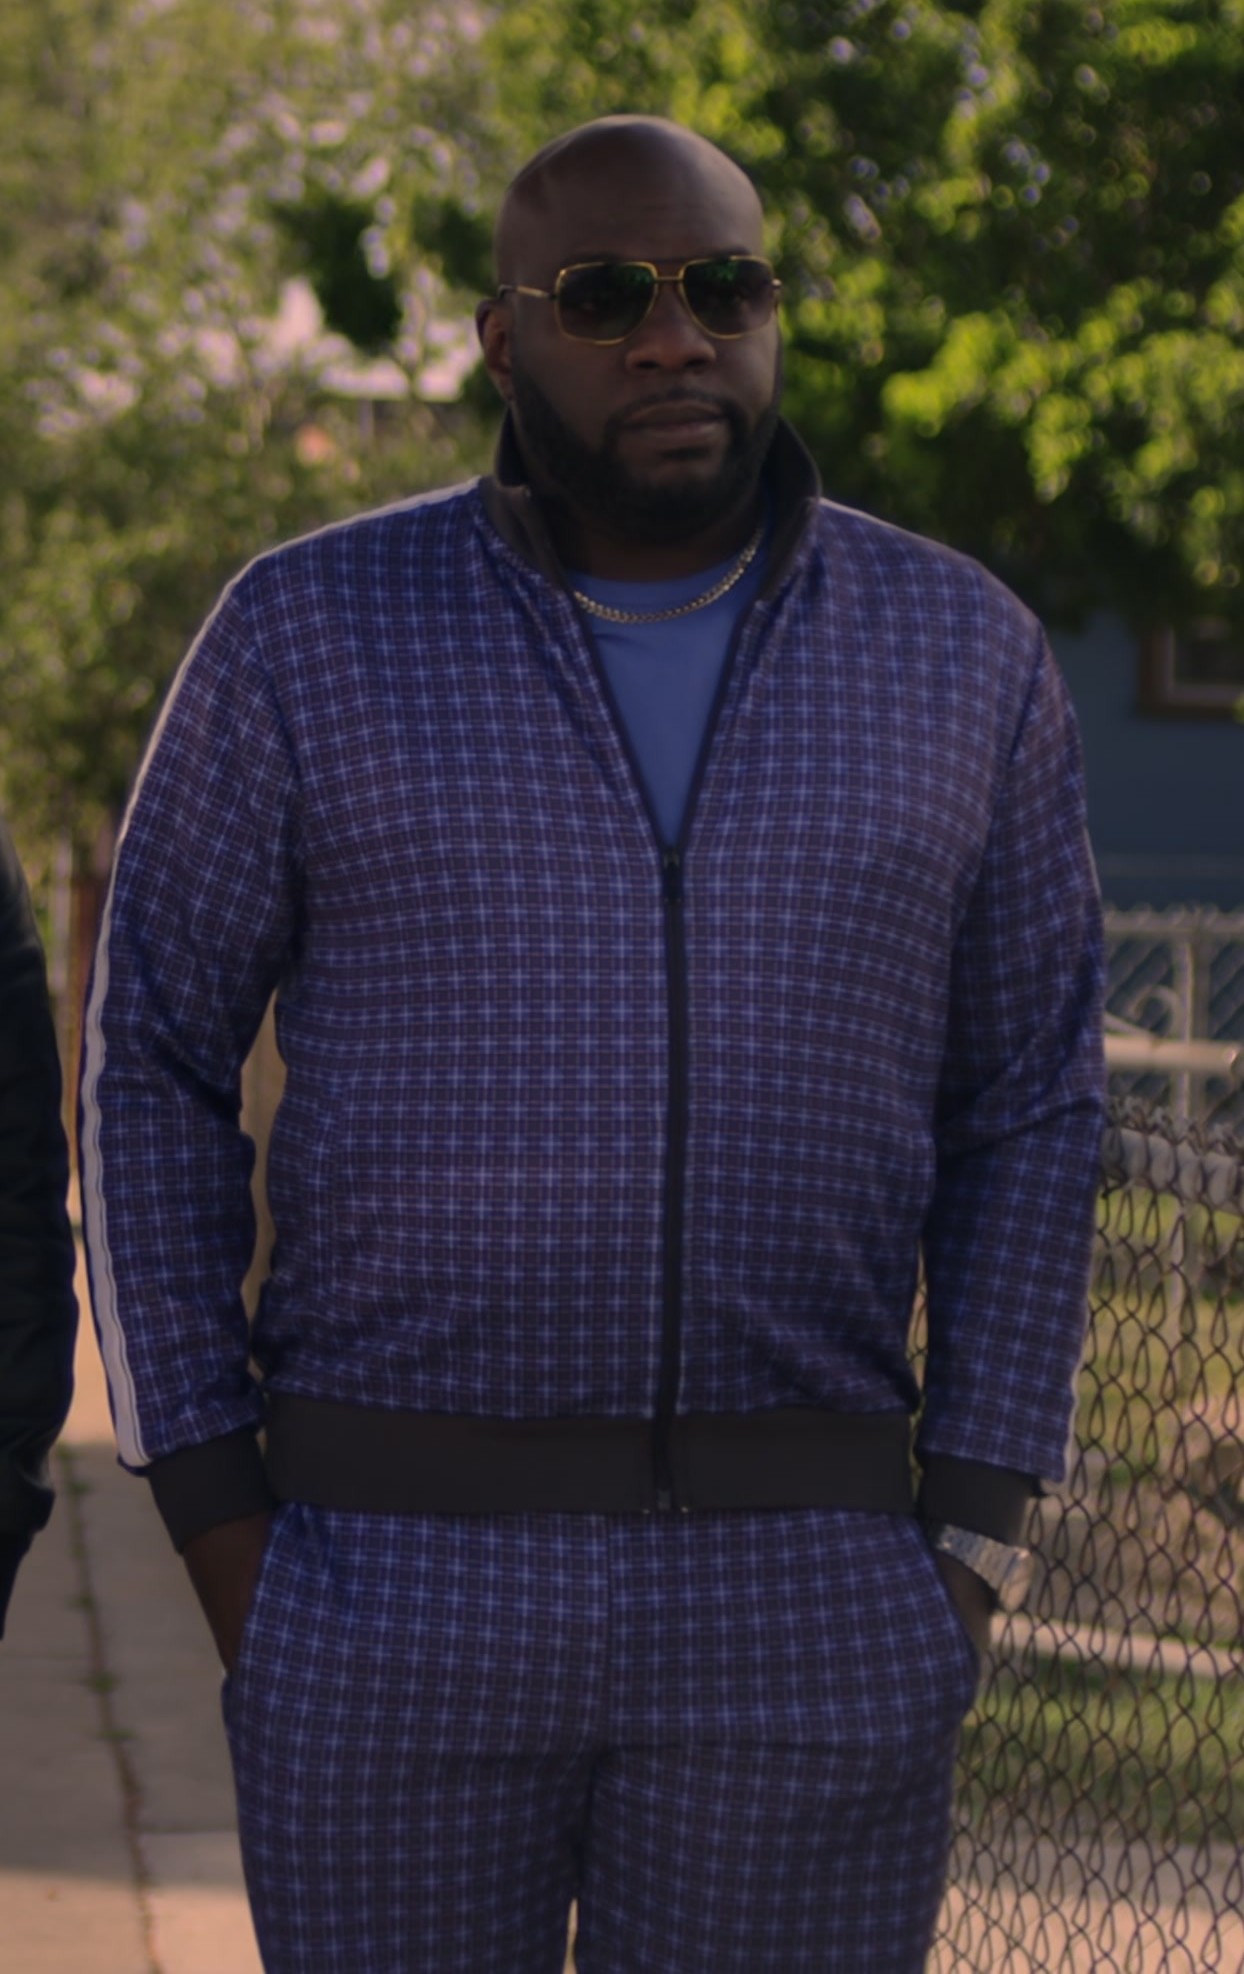 Worn on Bookie TV Show - Blue Check Jogging Suit Worn by Omar Dorsey as Ray